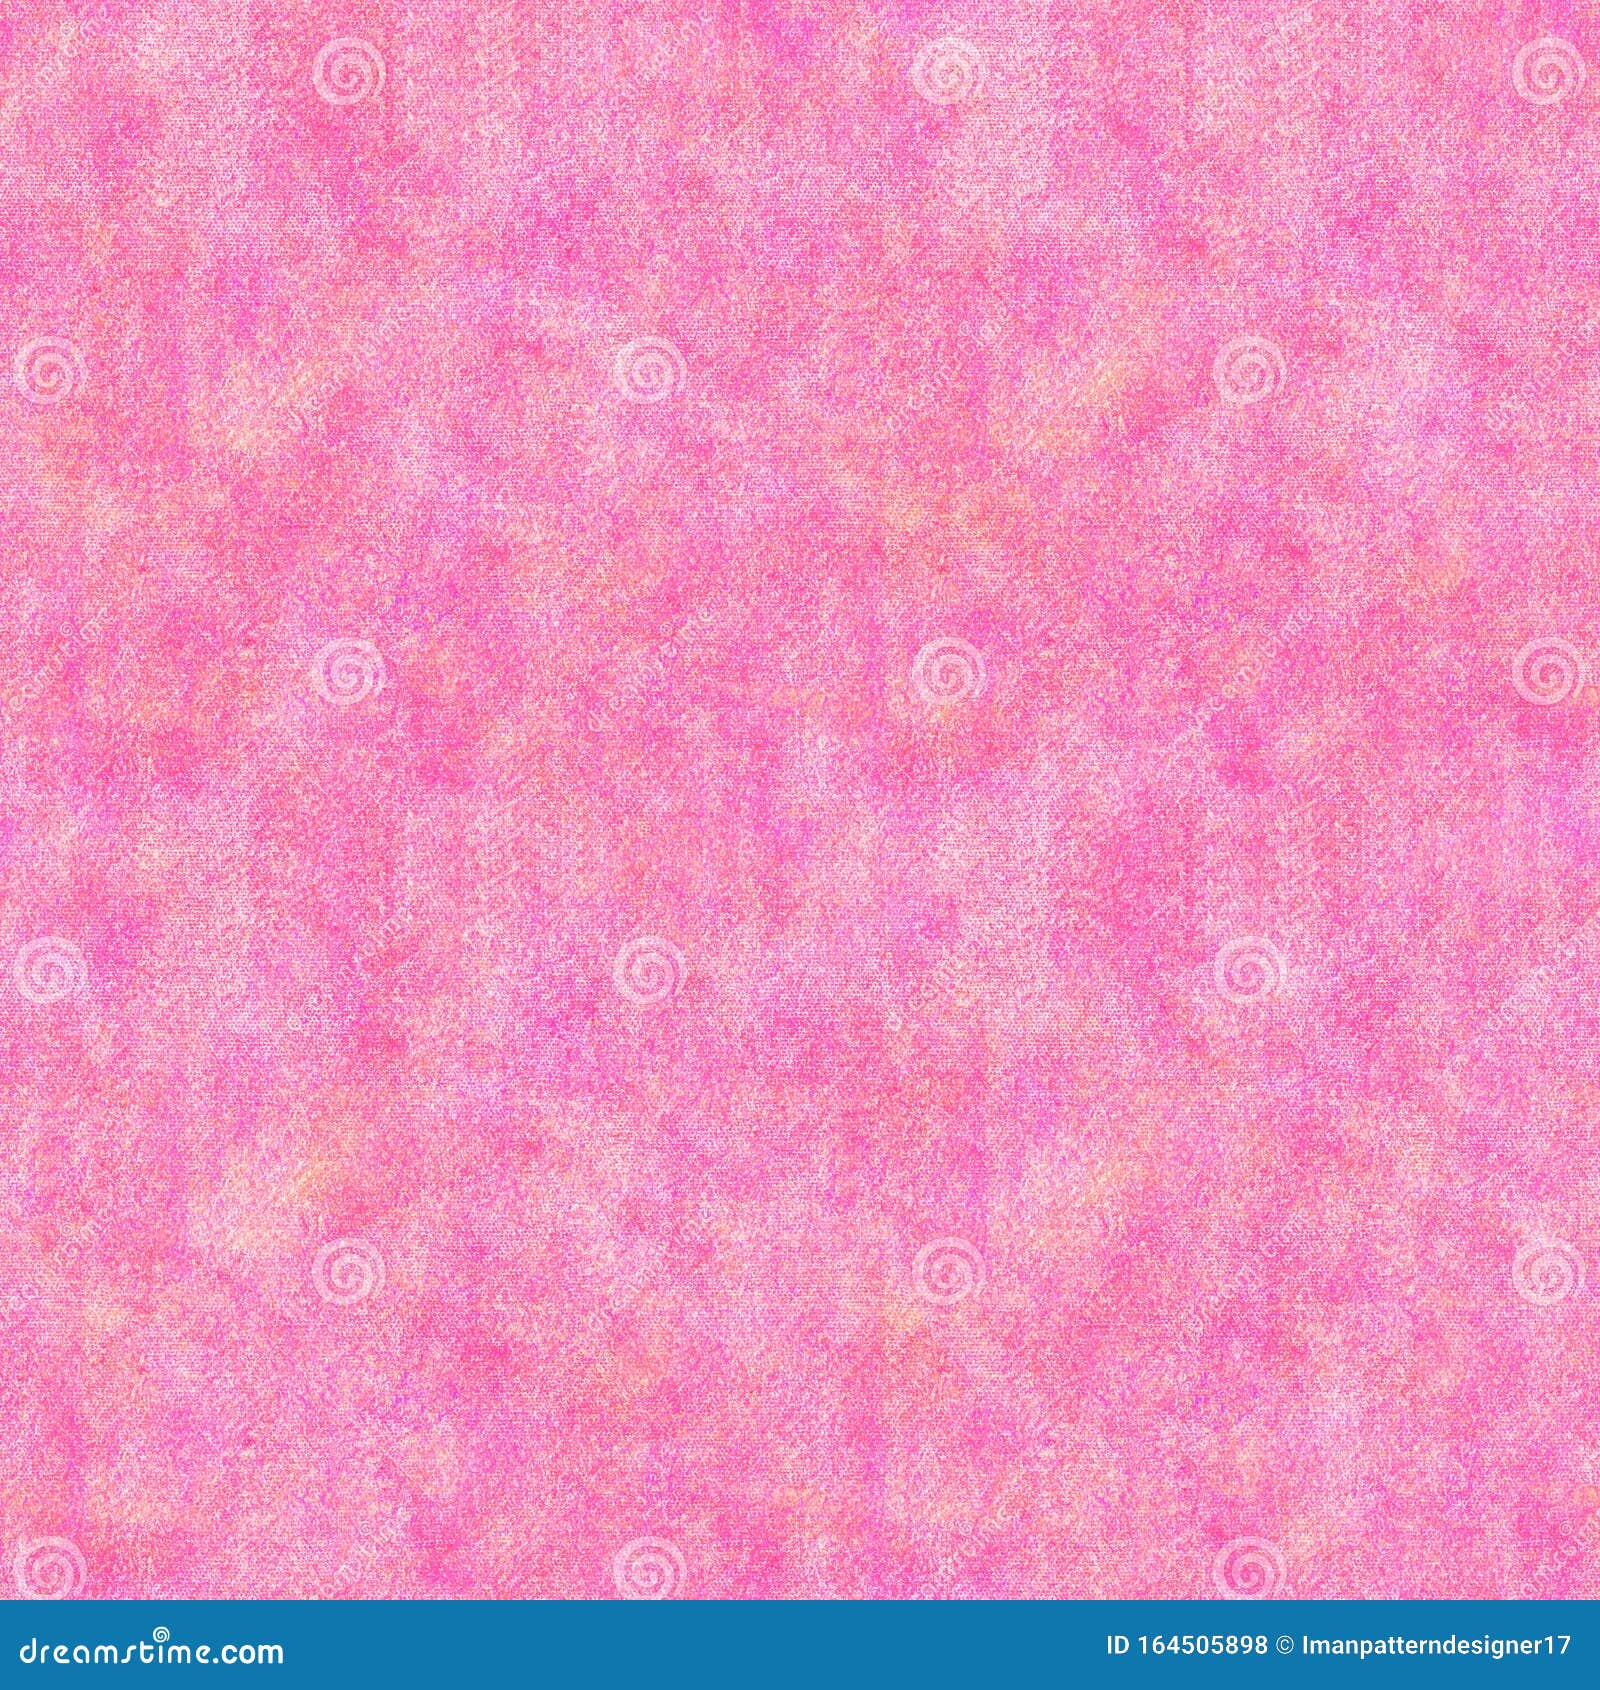 Pink Grungy Seamless Fabric Texture. Festive Pattern Tile Stock ...